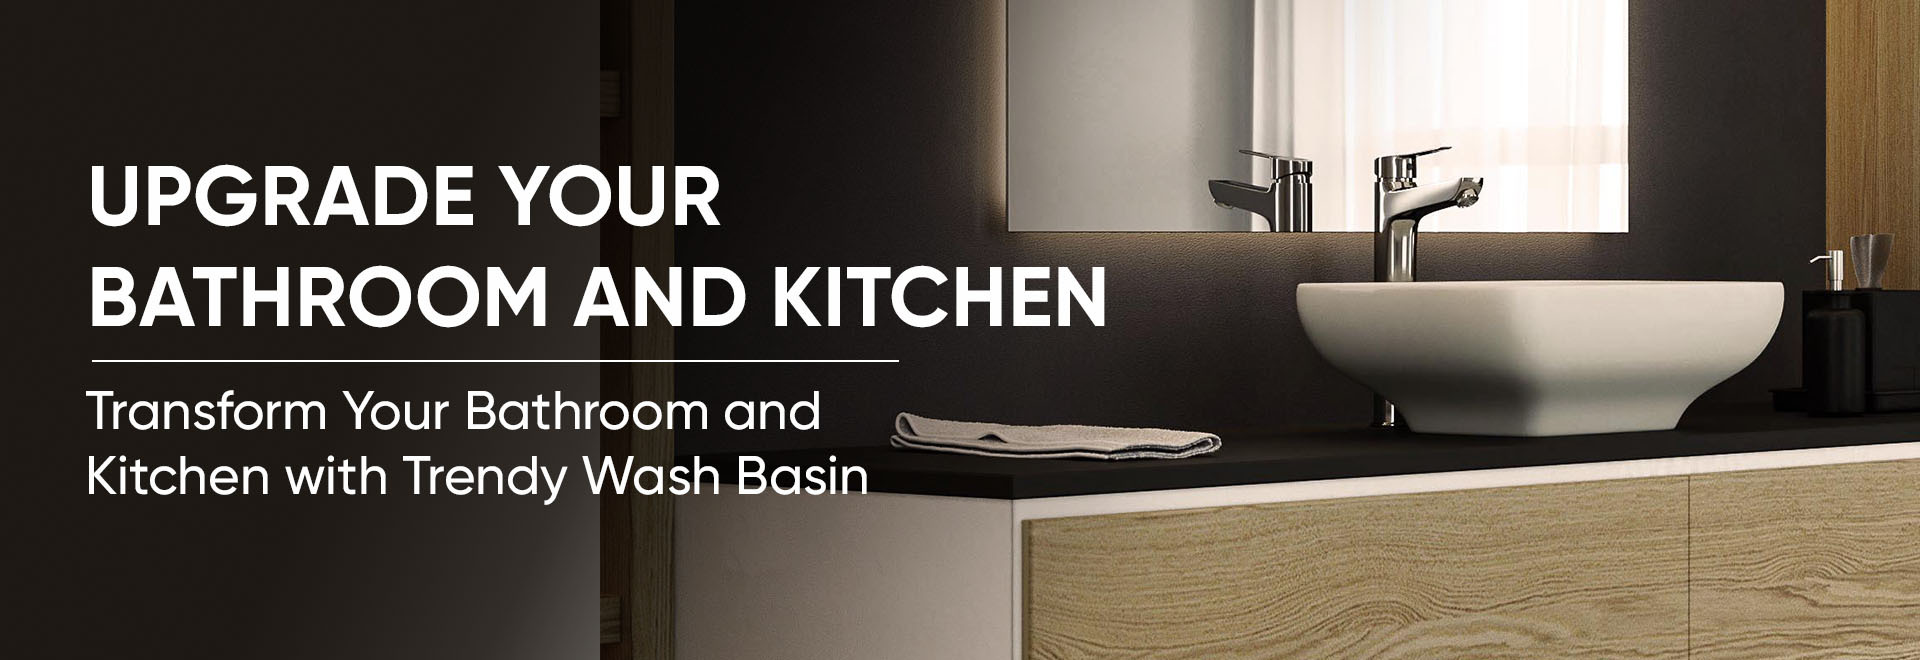 Upgrade Your Bathroom and Kitchen with These Stylish Basin Taps